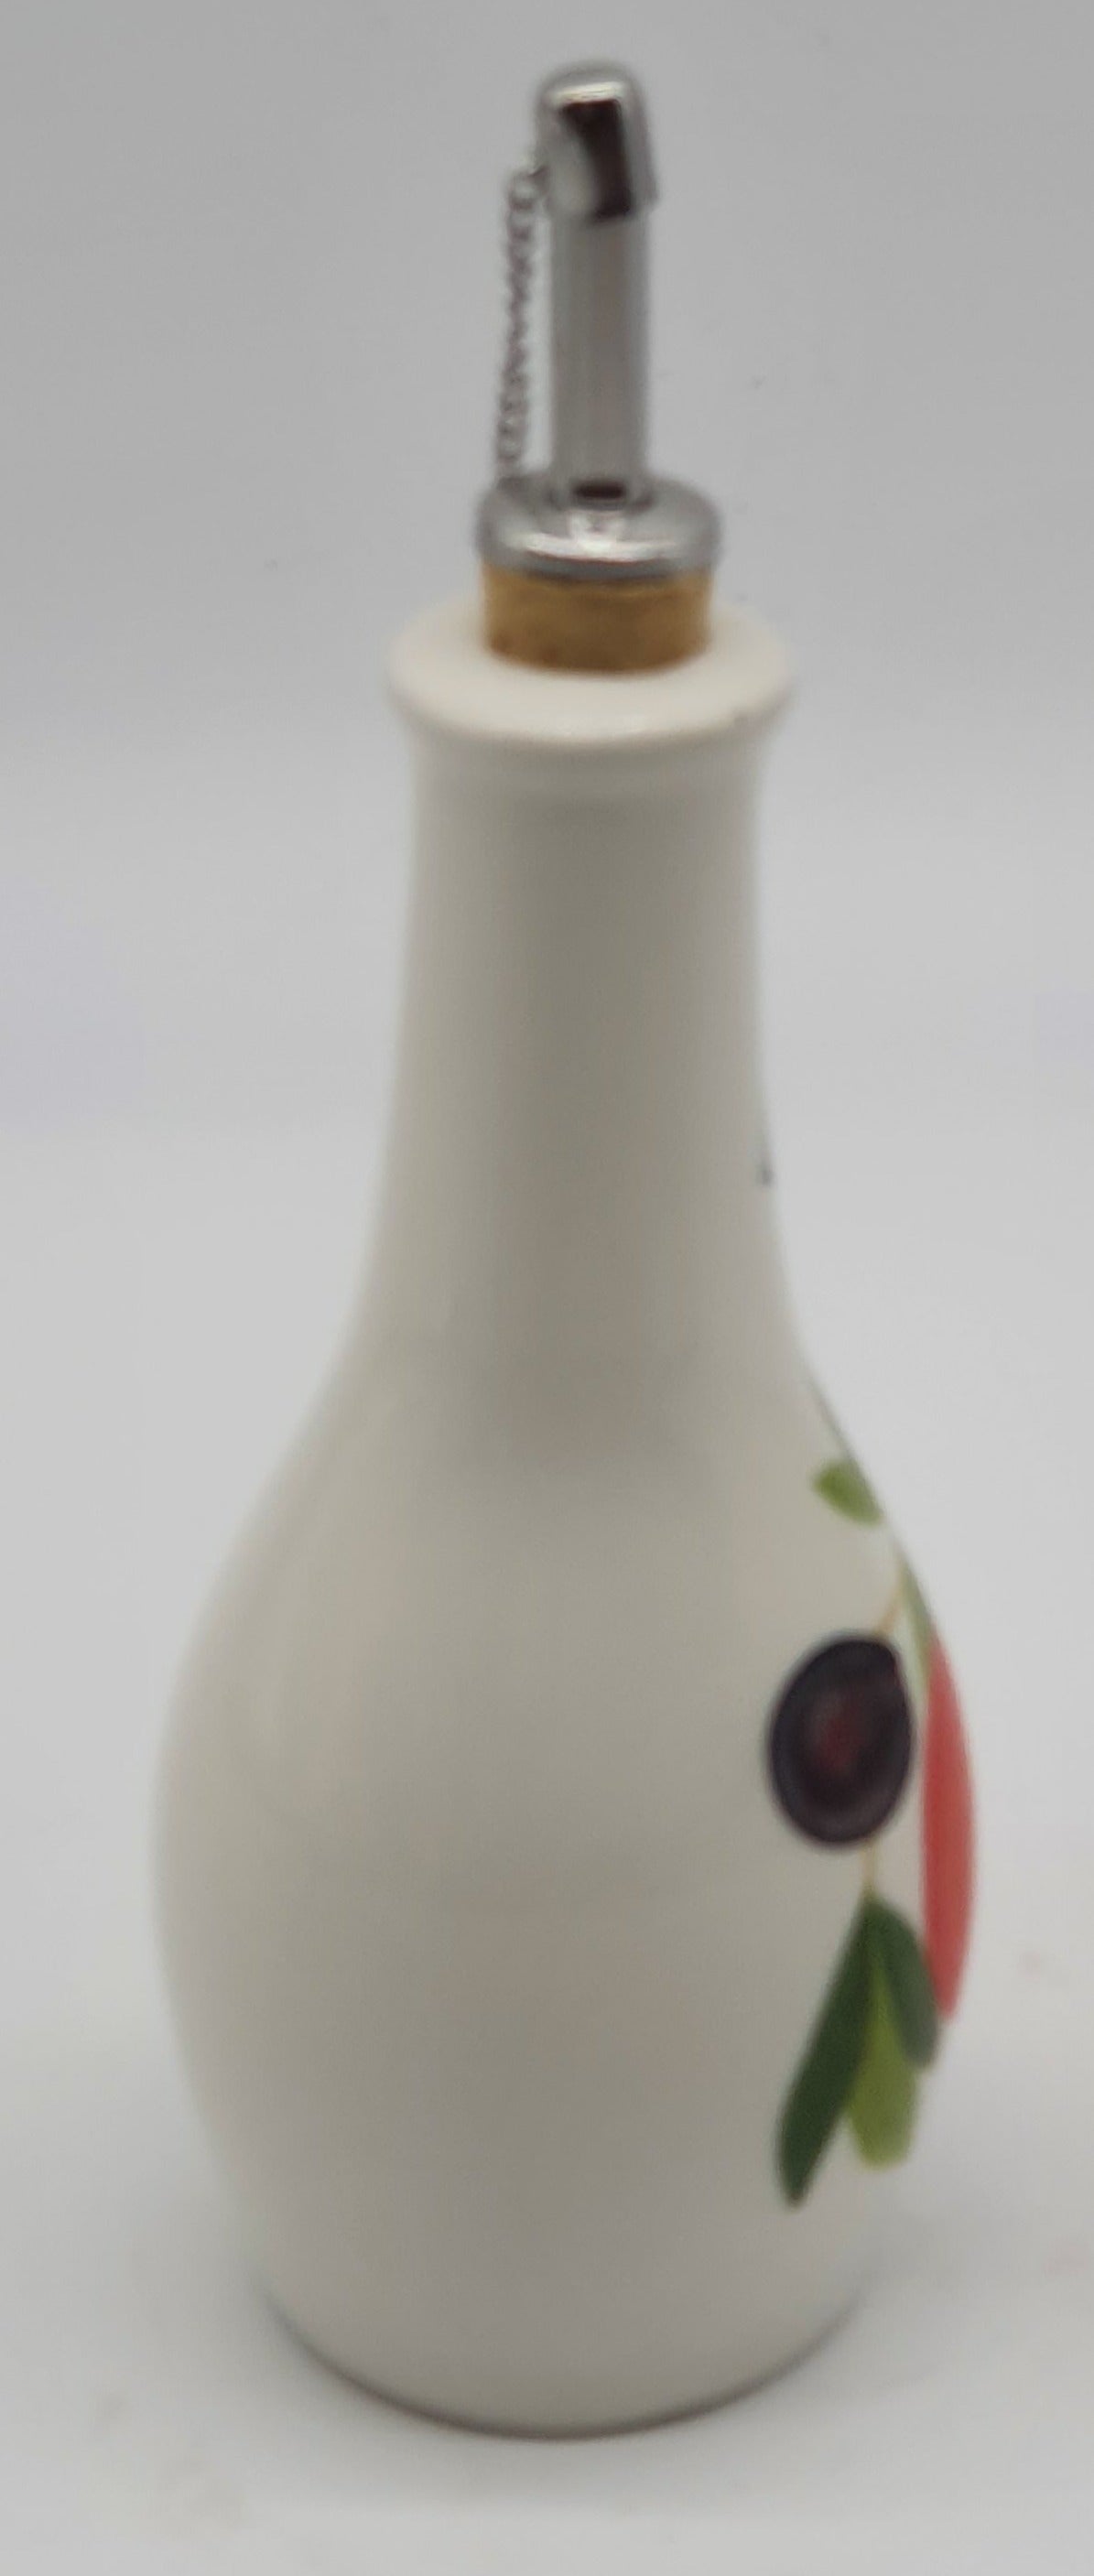 Small Oil Cruet With Tomatoes And Olives Decor